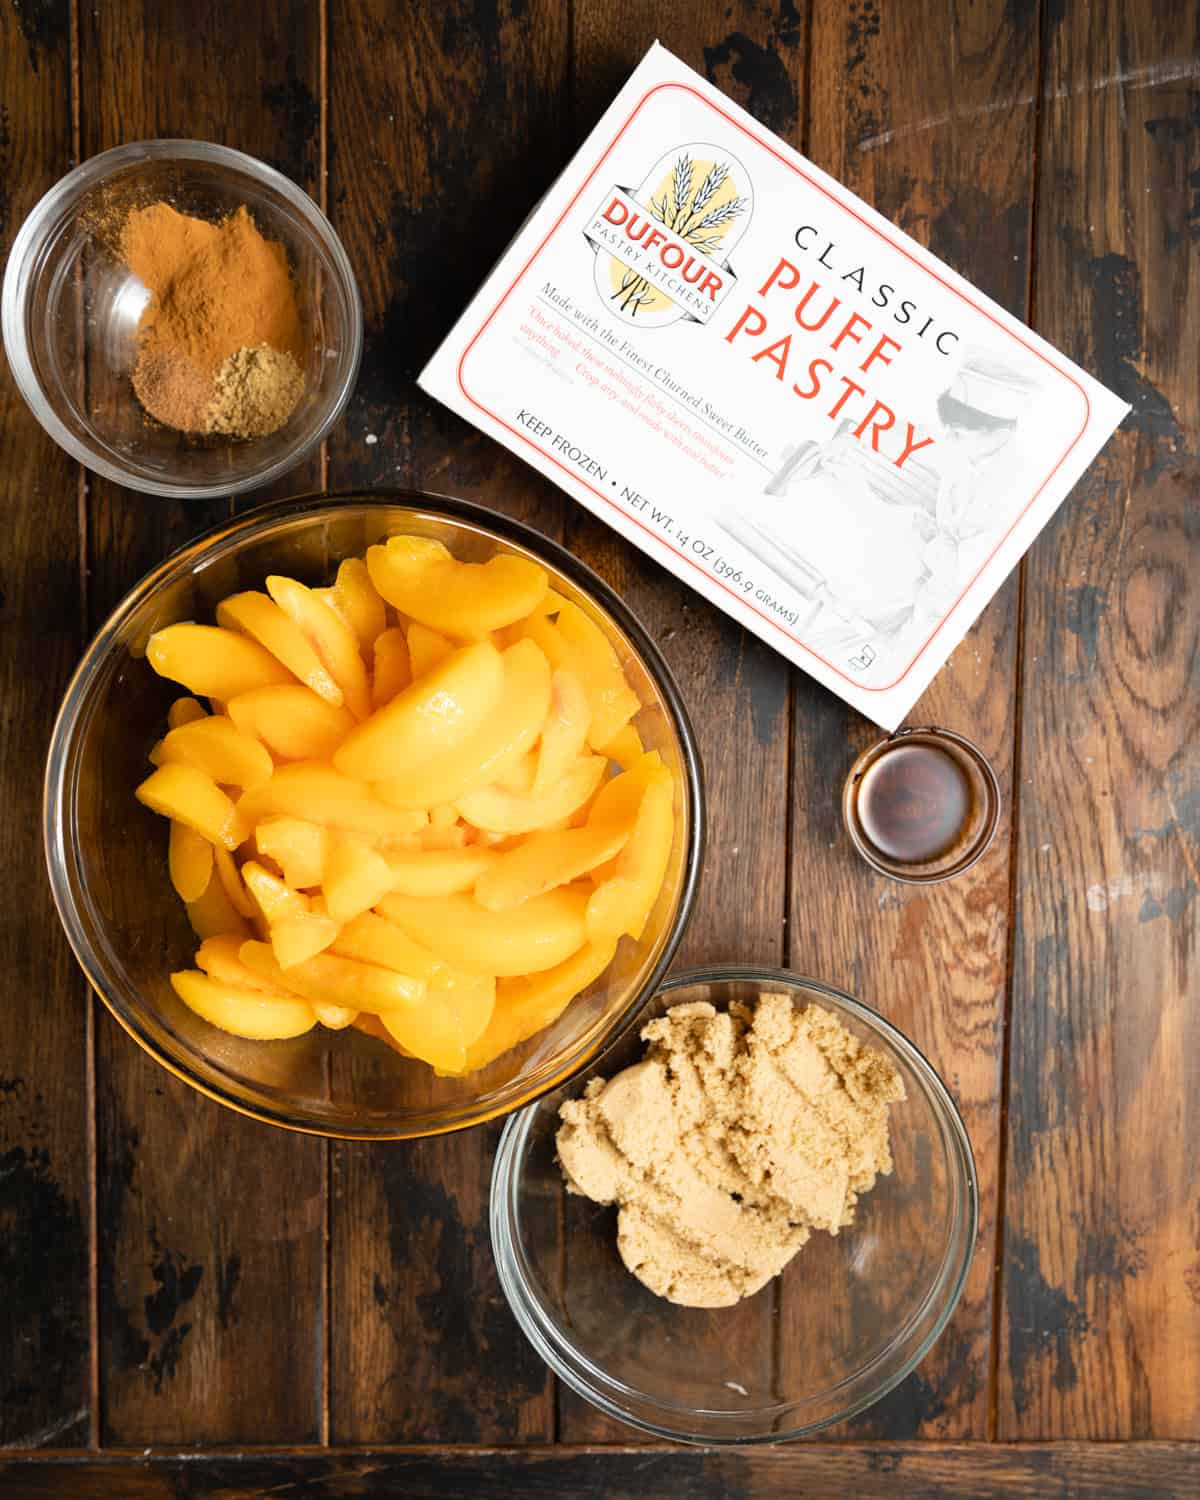 Ingredients to make a rustic peach galette on a wooden table.